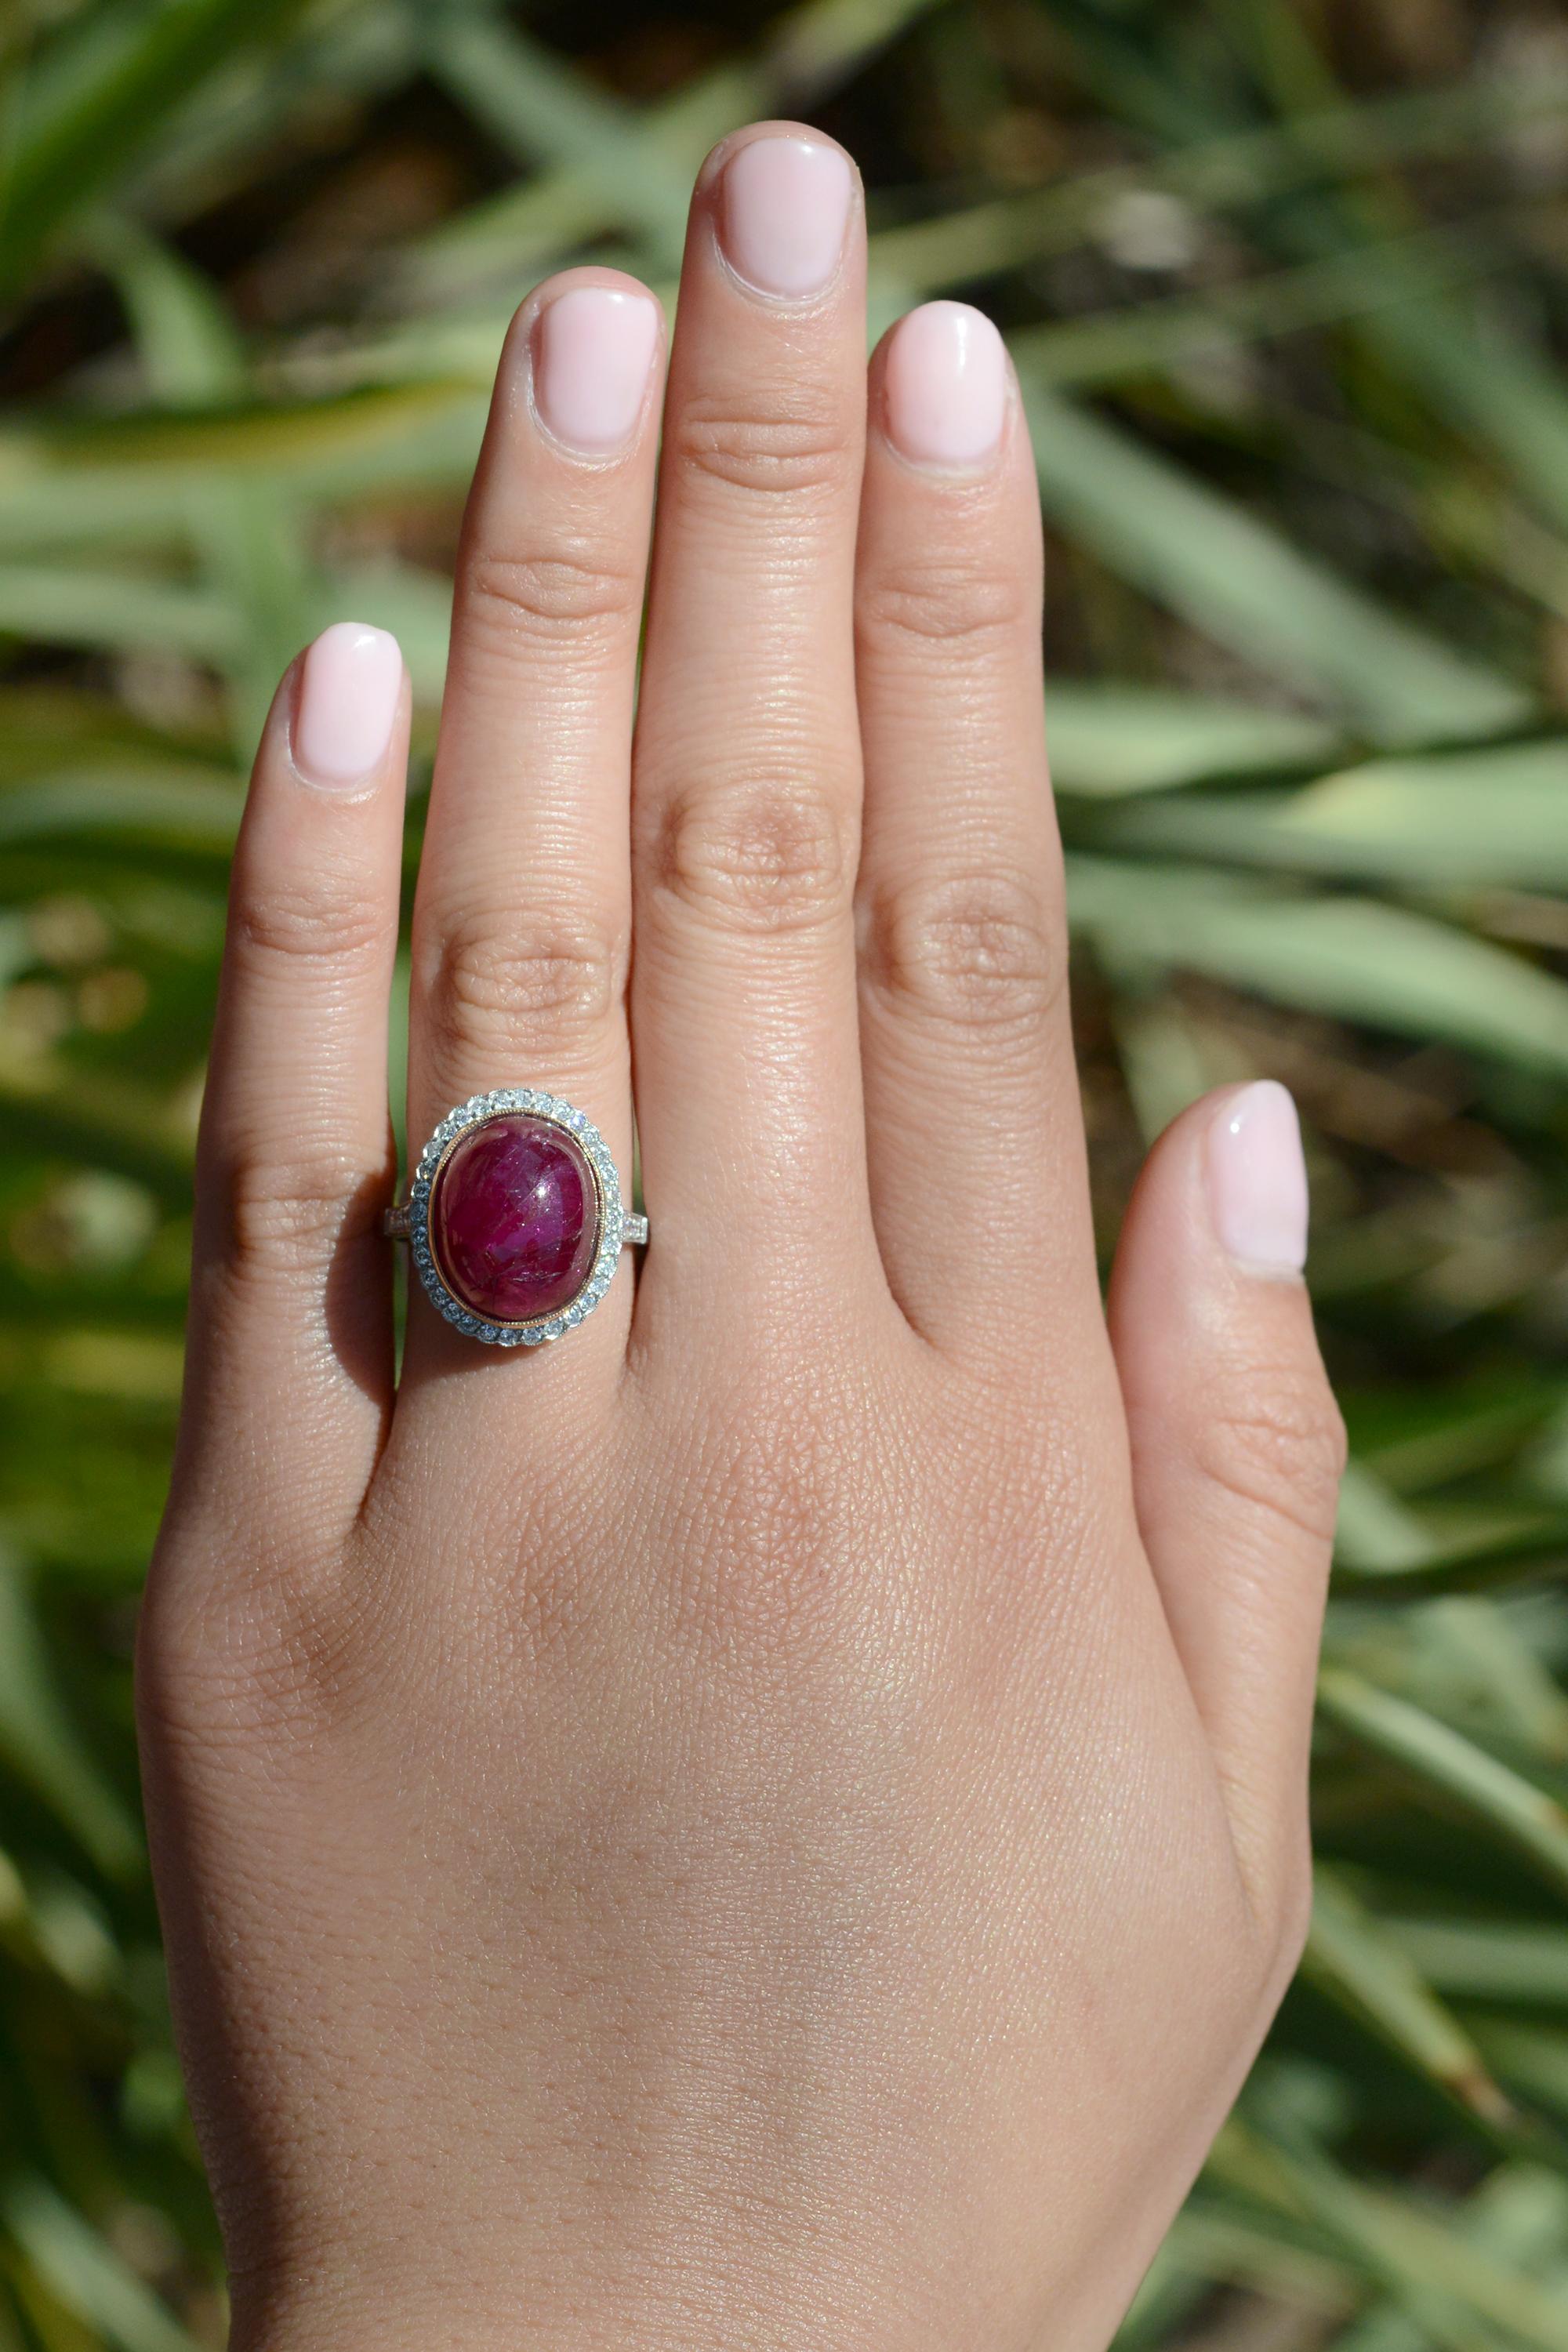 This exquisite expression of classic Art Deco style is embellished with a stunning 17.15 Carat GIA certified, unheated pigeon blood red ruby. We rescued this fabulous gemstone from a 100 year old ring owned by a Burmese doctor and repurposed it,